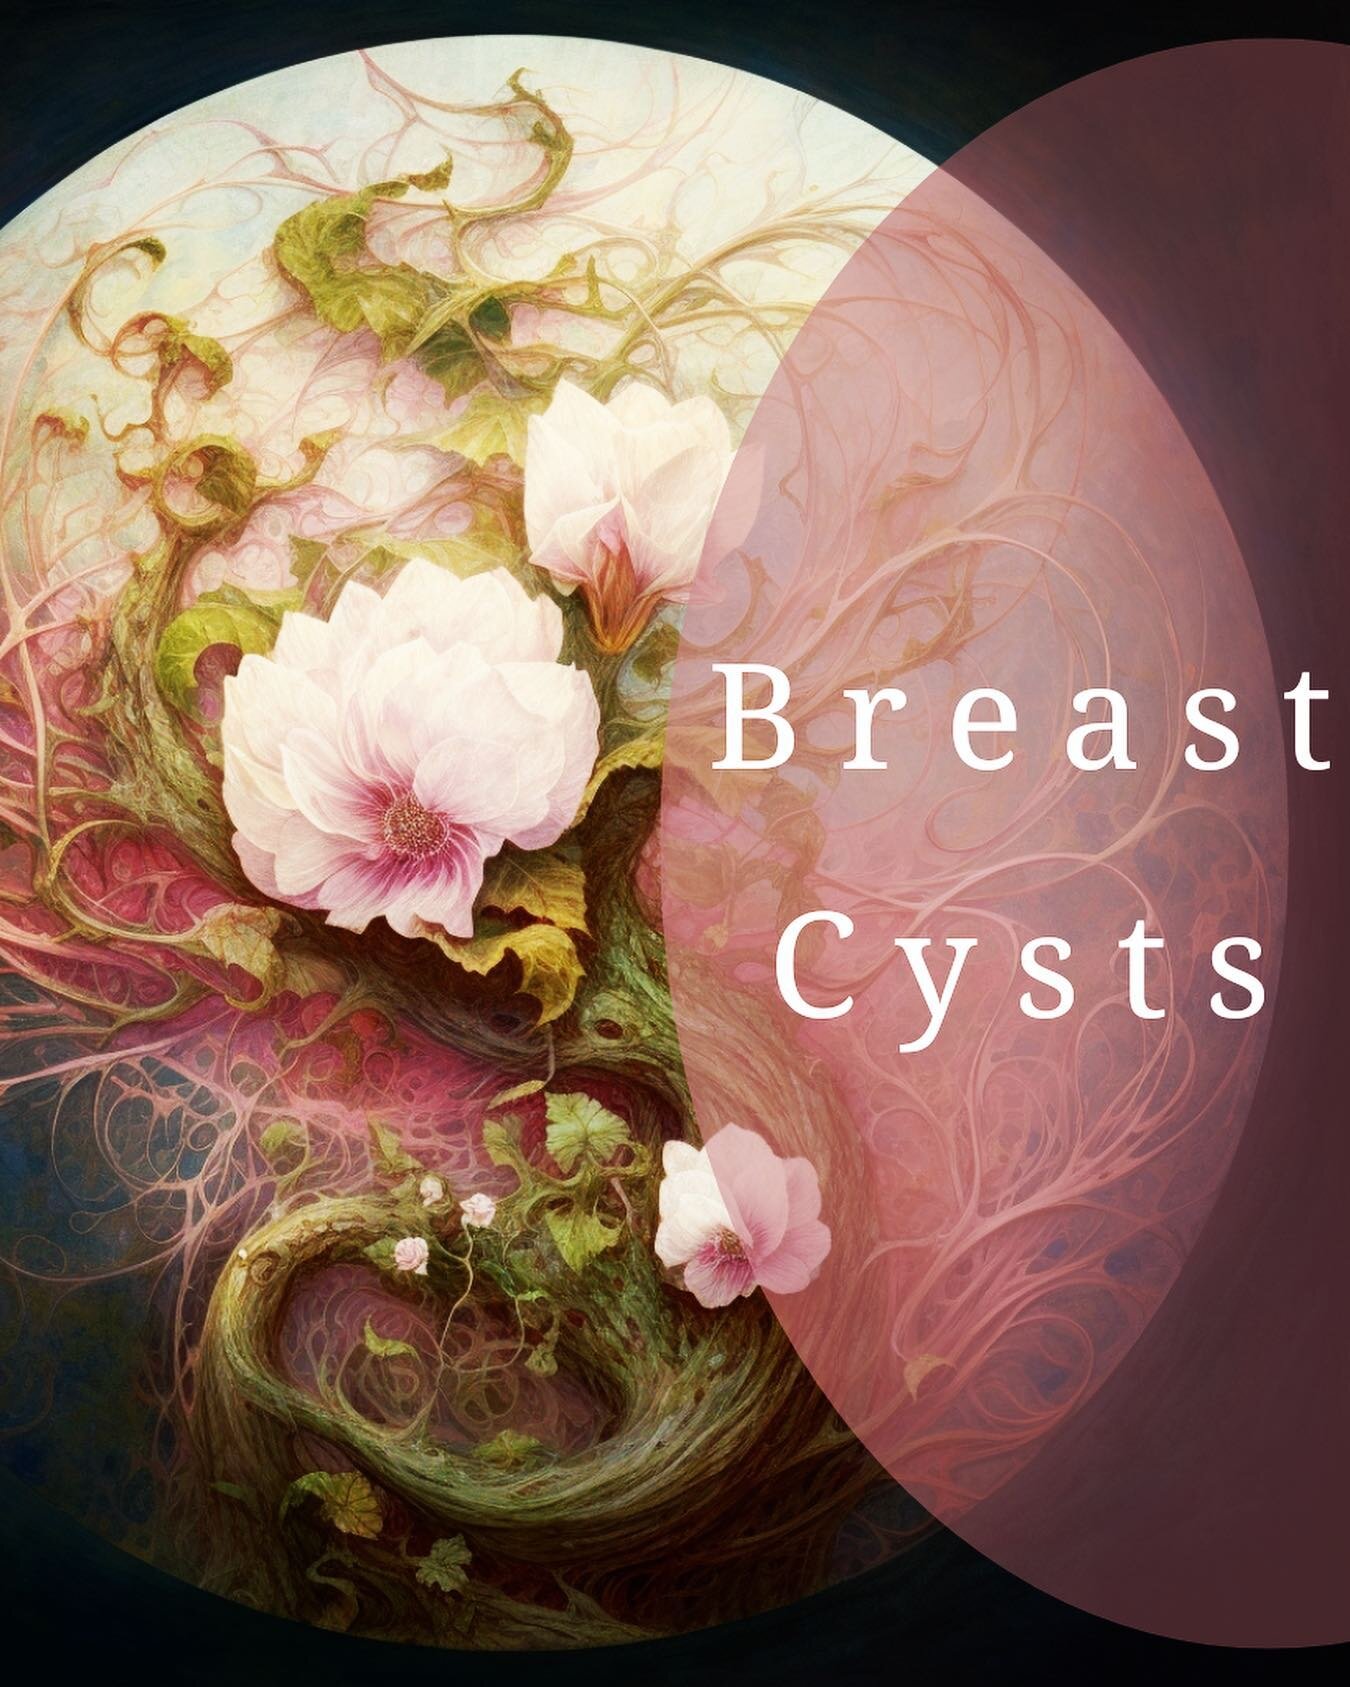 Breasts represent your sensitivity, your ability to nurture and be nurtured. 

The key themes surrounding this issue are around unspoken anger, frustration and resentment in close relationships. 

This may relate to mothering or your mother, but can 